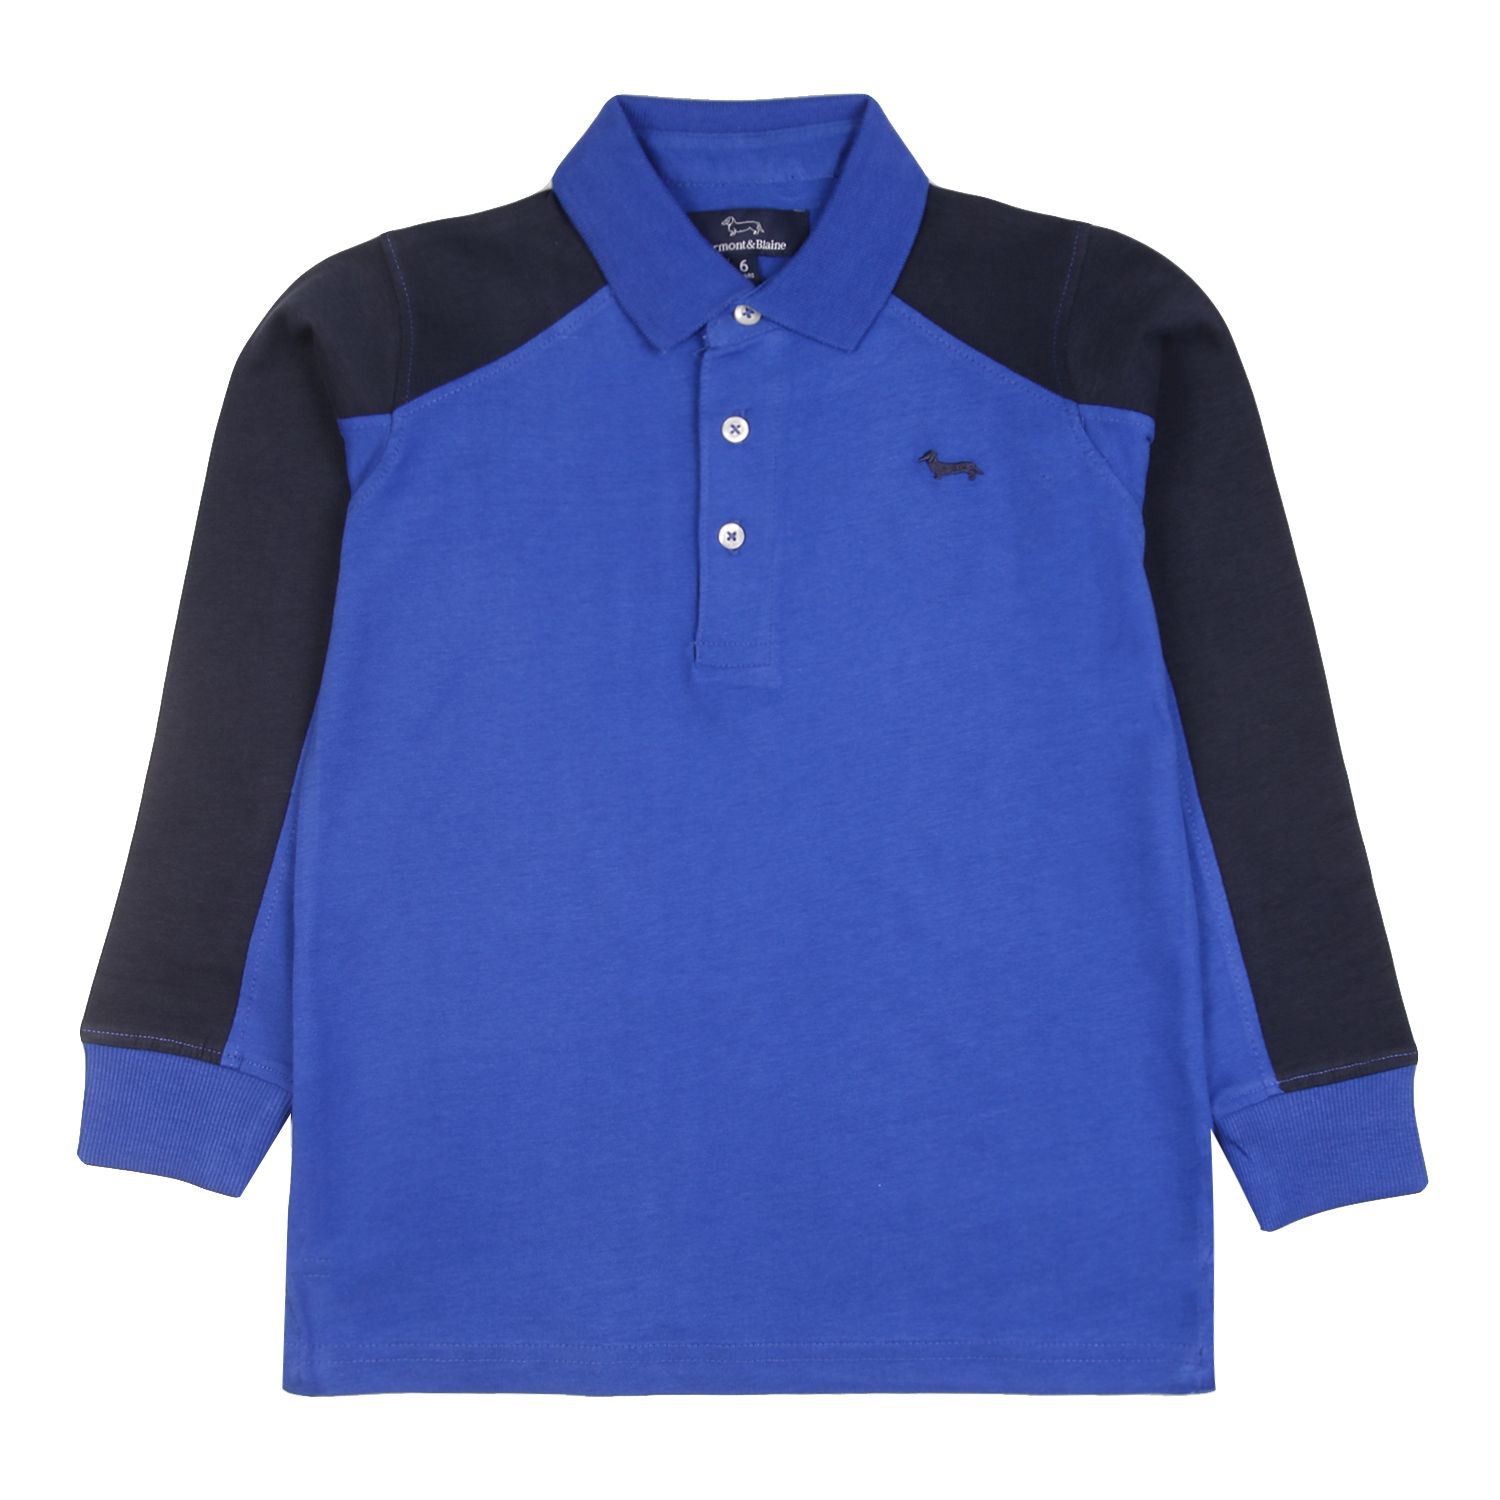 Harmont & Blaine ocean polo shirt -Details long-sleeved polo shirt, with contrasting color, elastic cuffs, classic collar, ocean blue in the center, logo visible on the chest, button closure -Hand wash